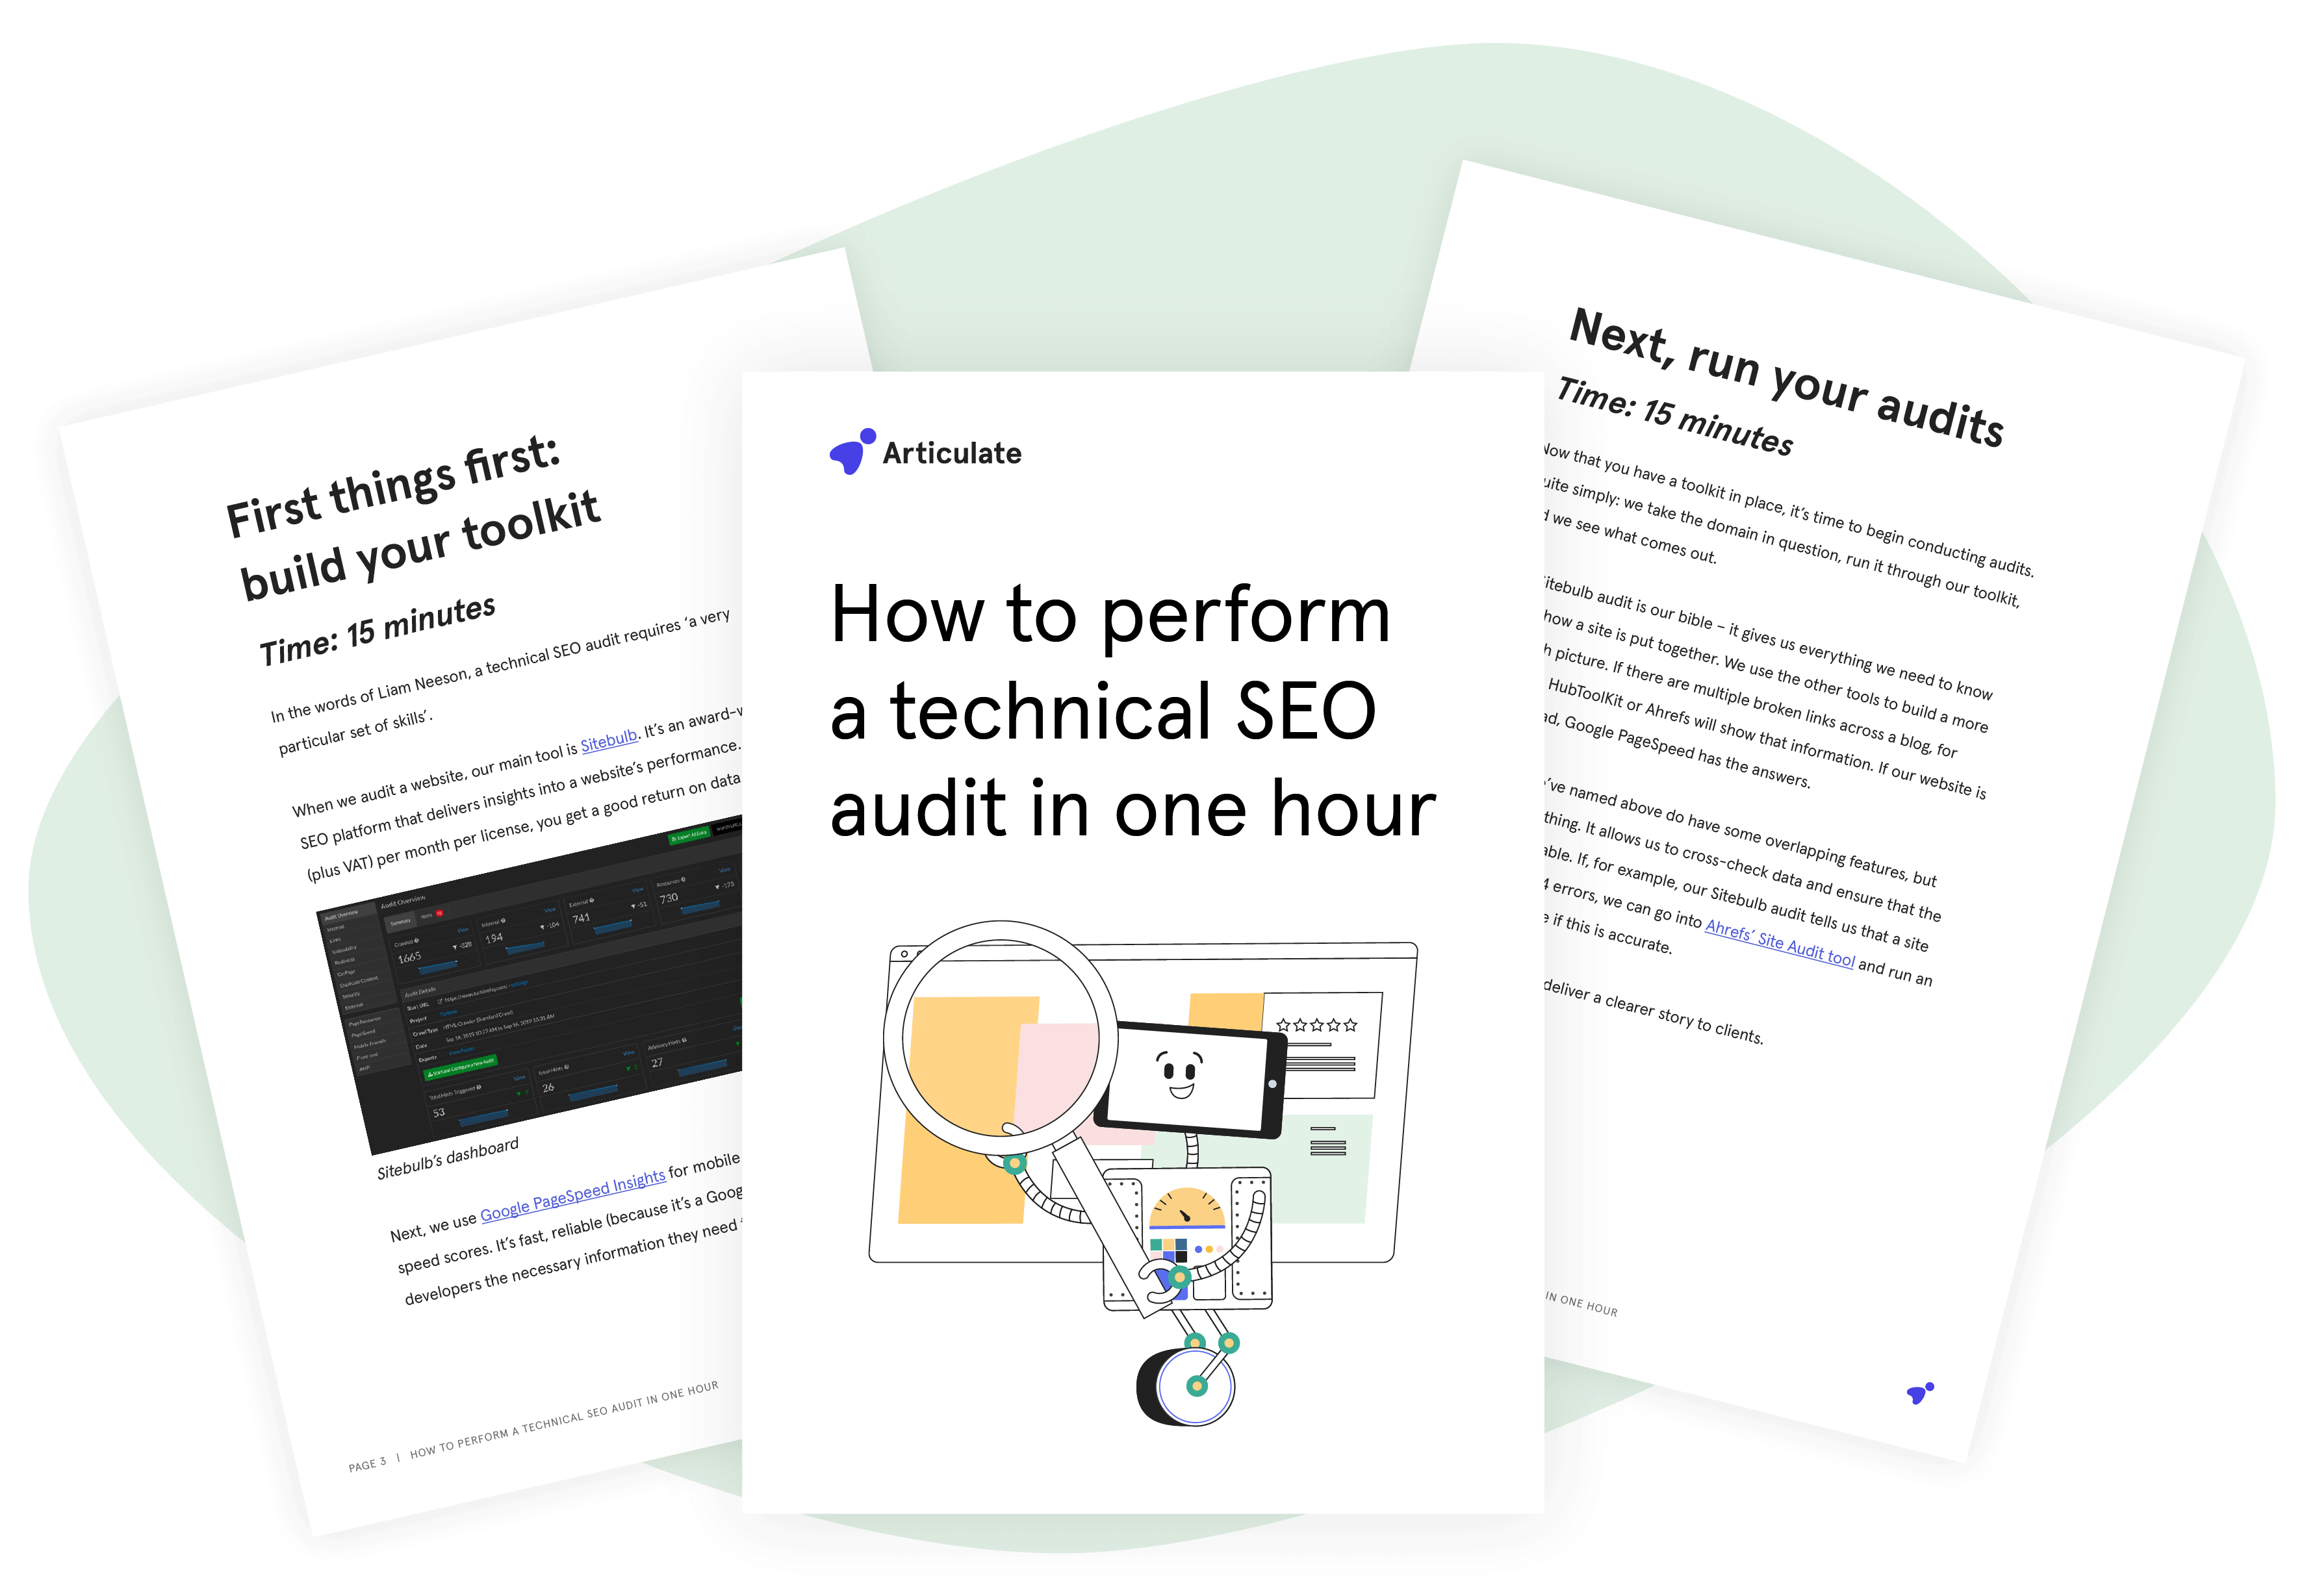 Perform a technical SEO audit in 1 hour